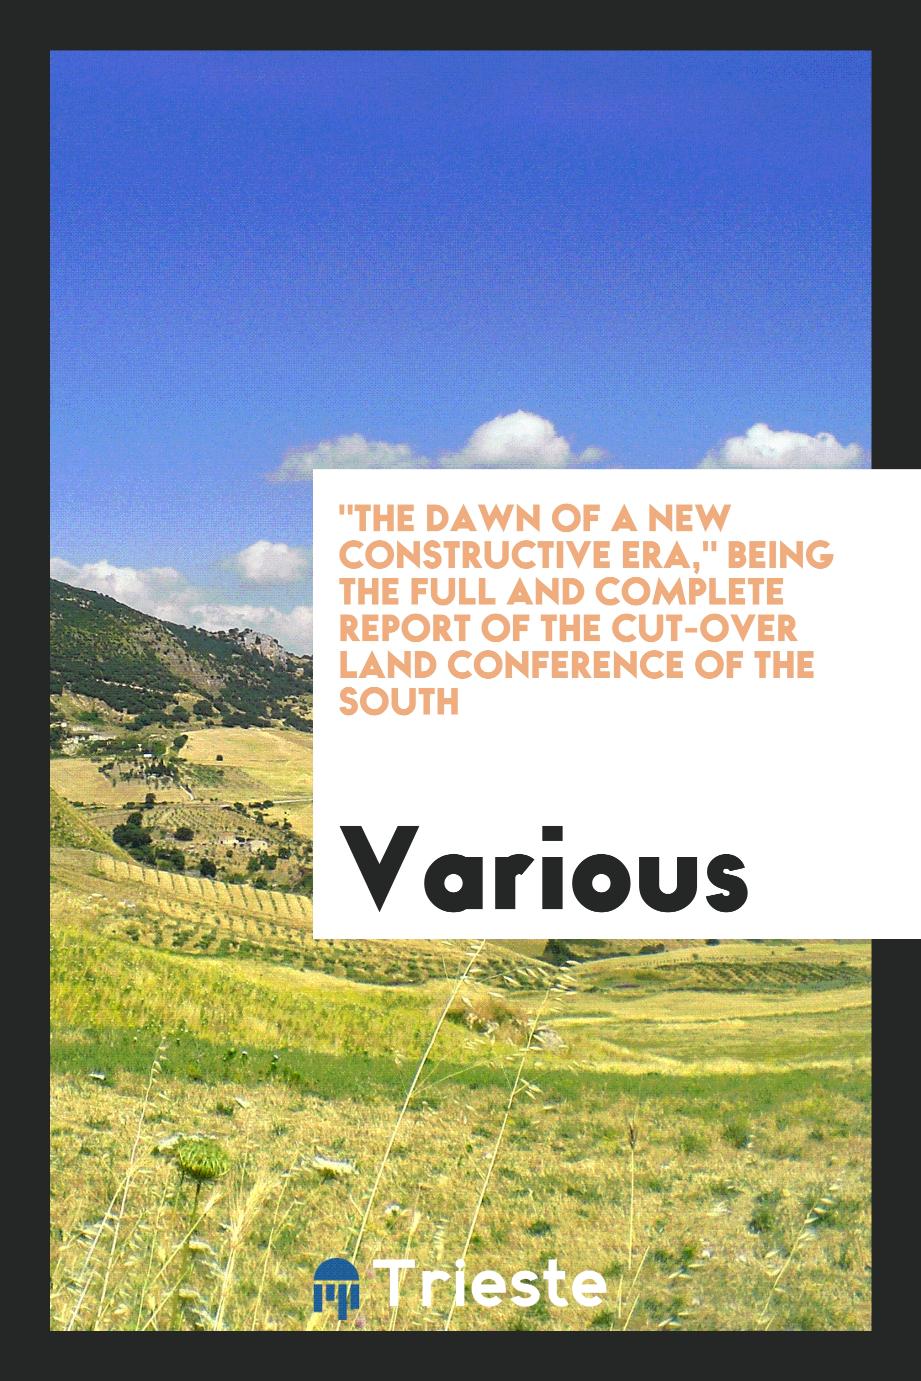 "The dawn of a new constructive era," being the full and complete report of the Cut-over Land Conference of the South